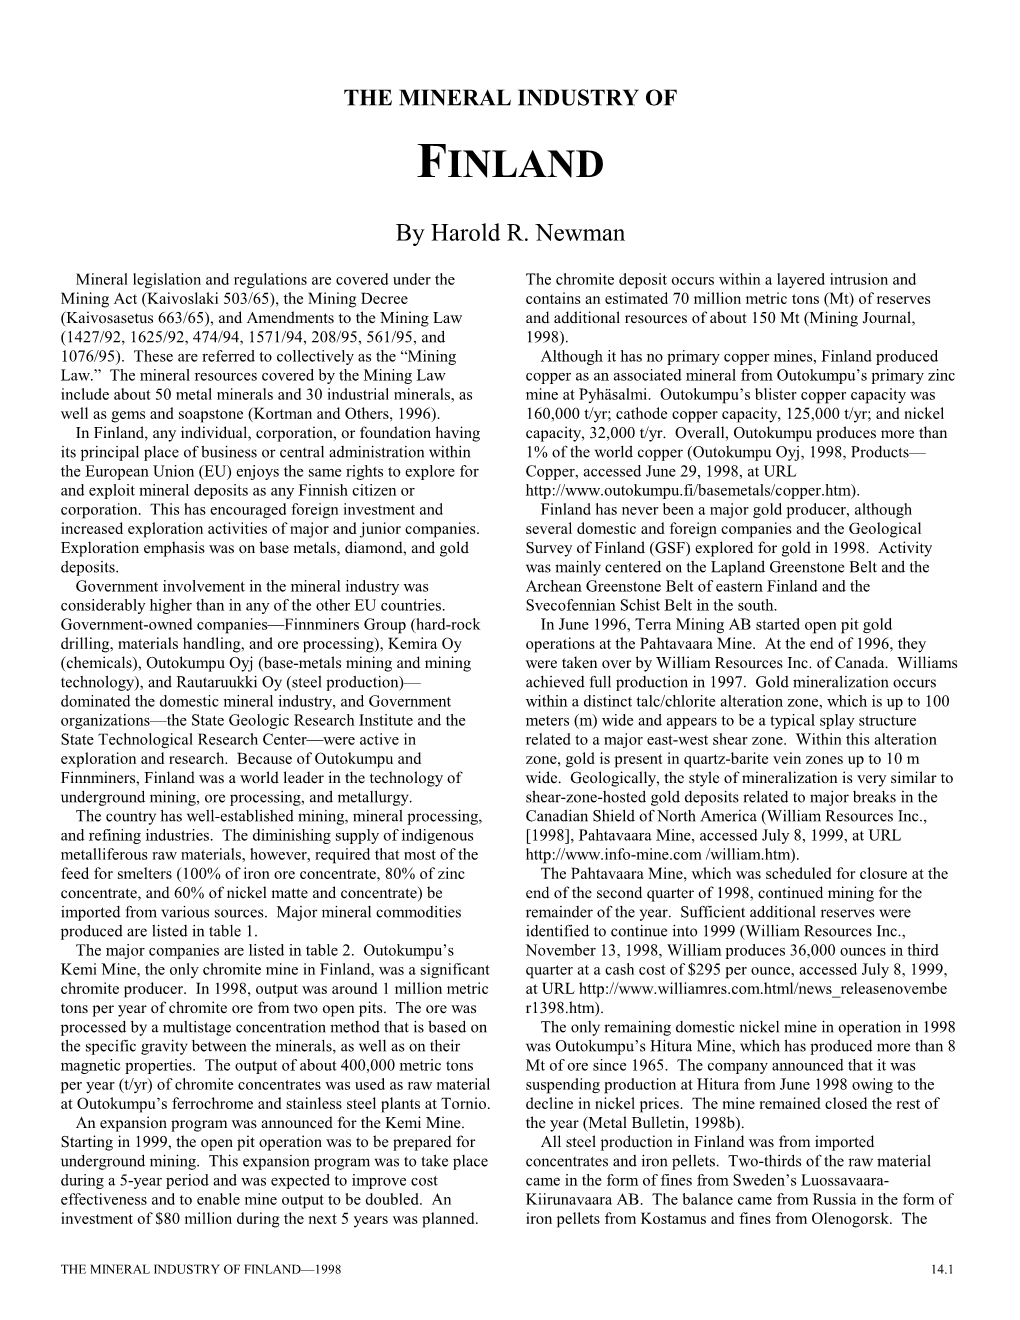 The Mineral Industry of Finland in 1998